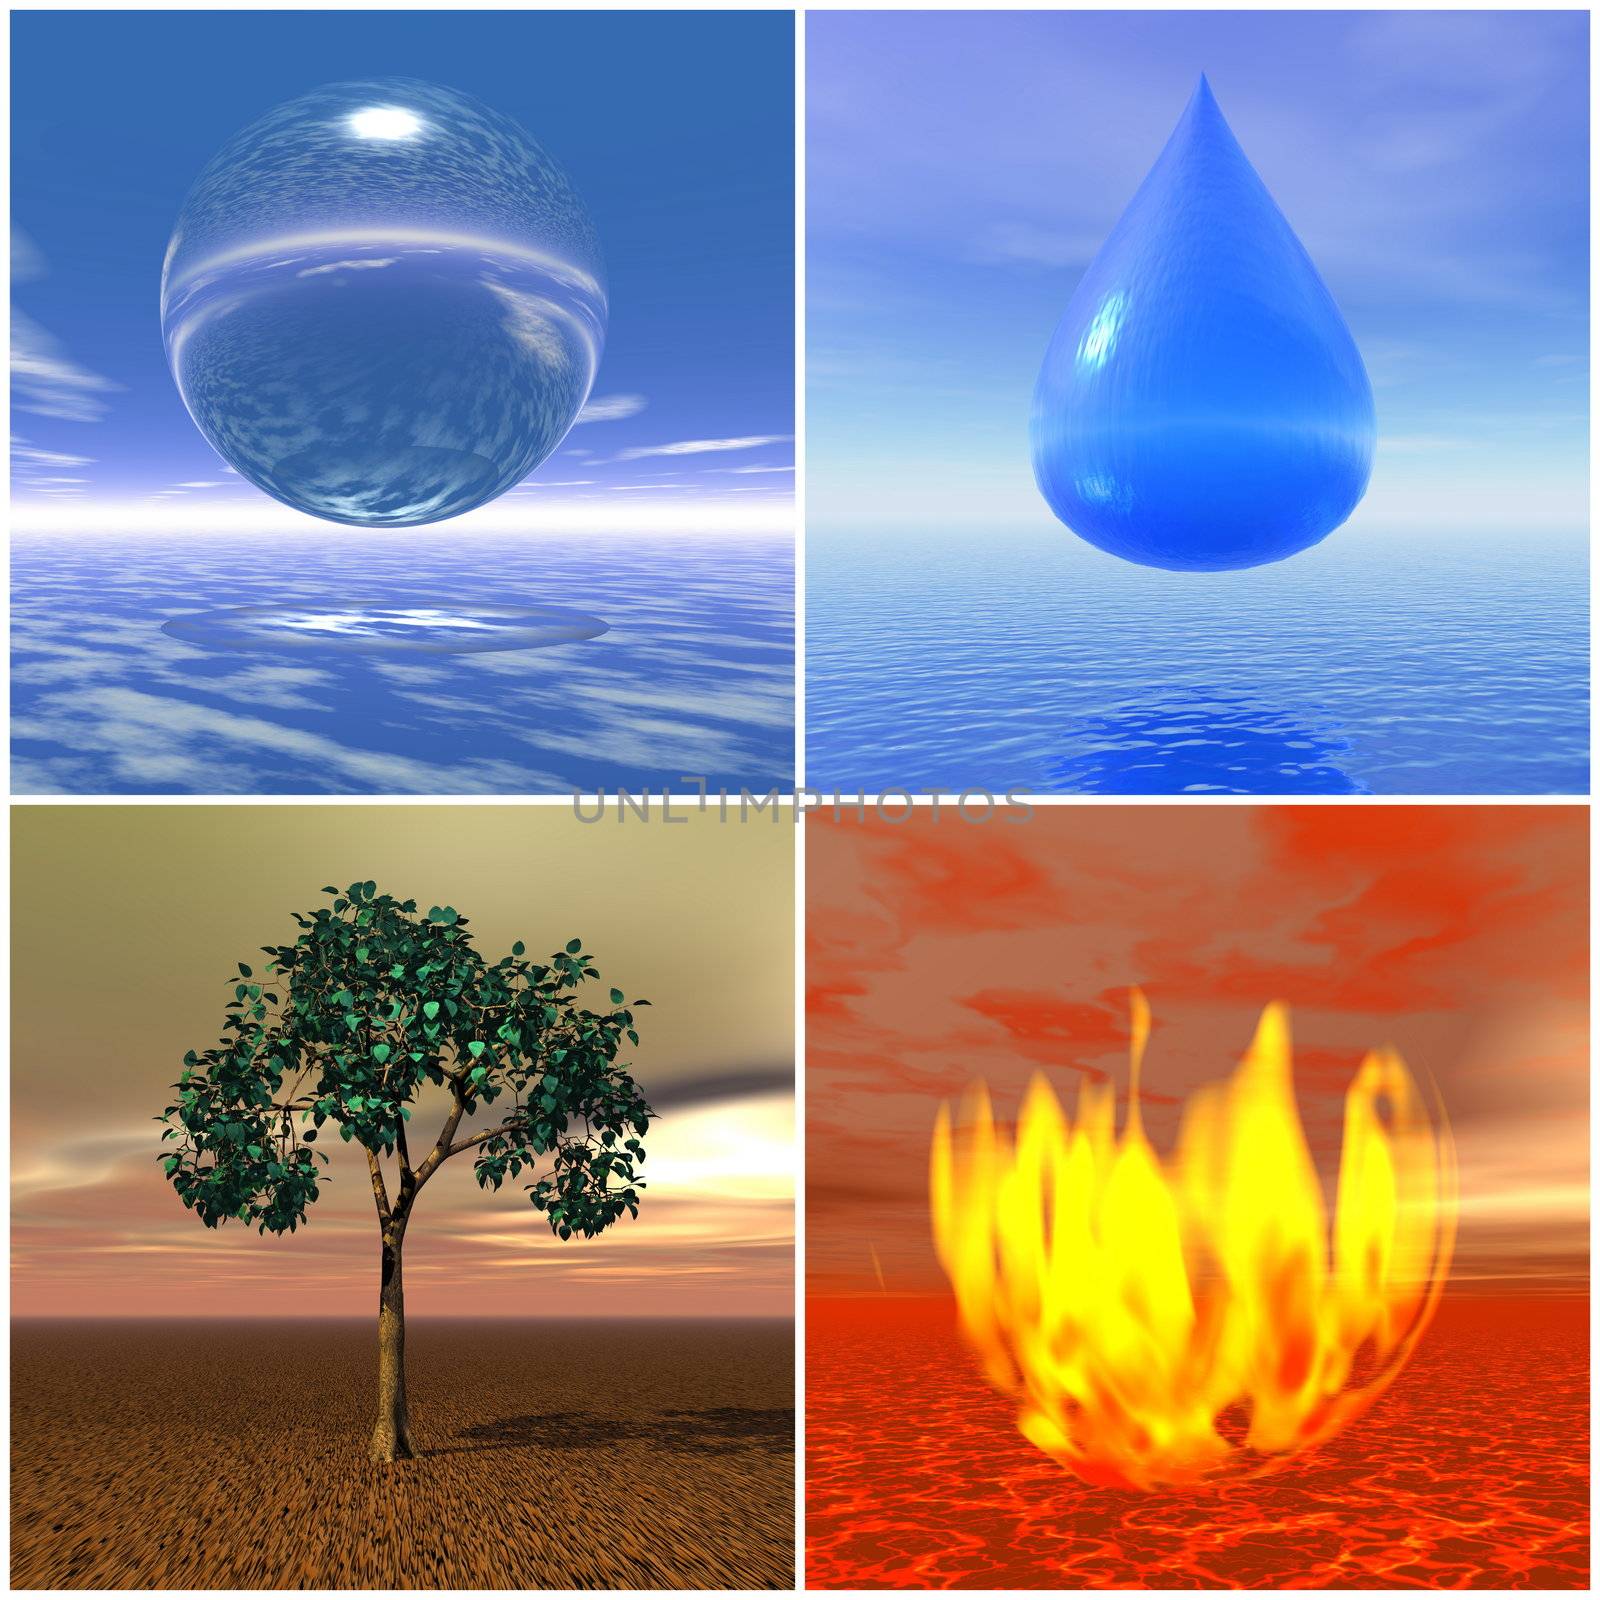 Icones for four elements air, water, earth and fire